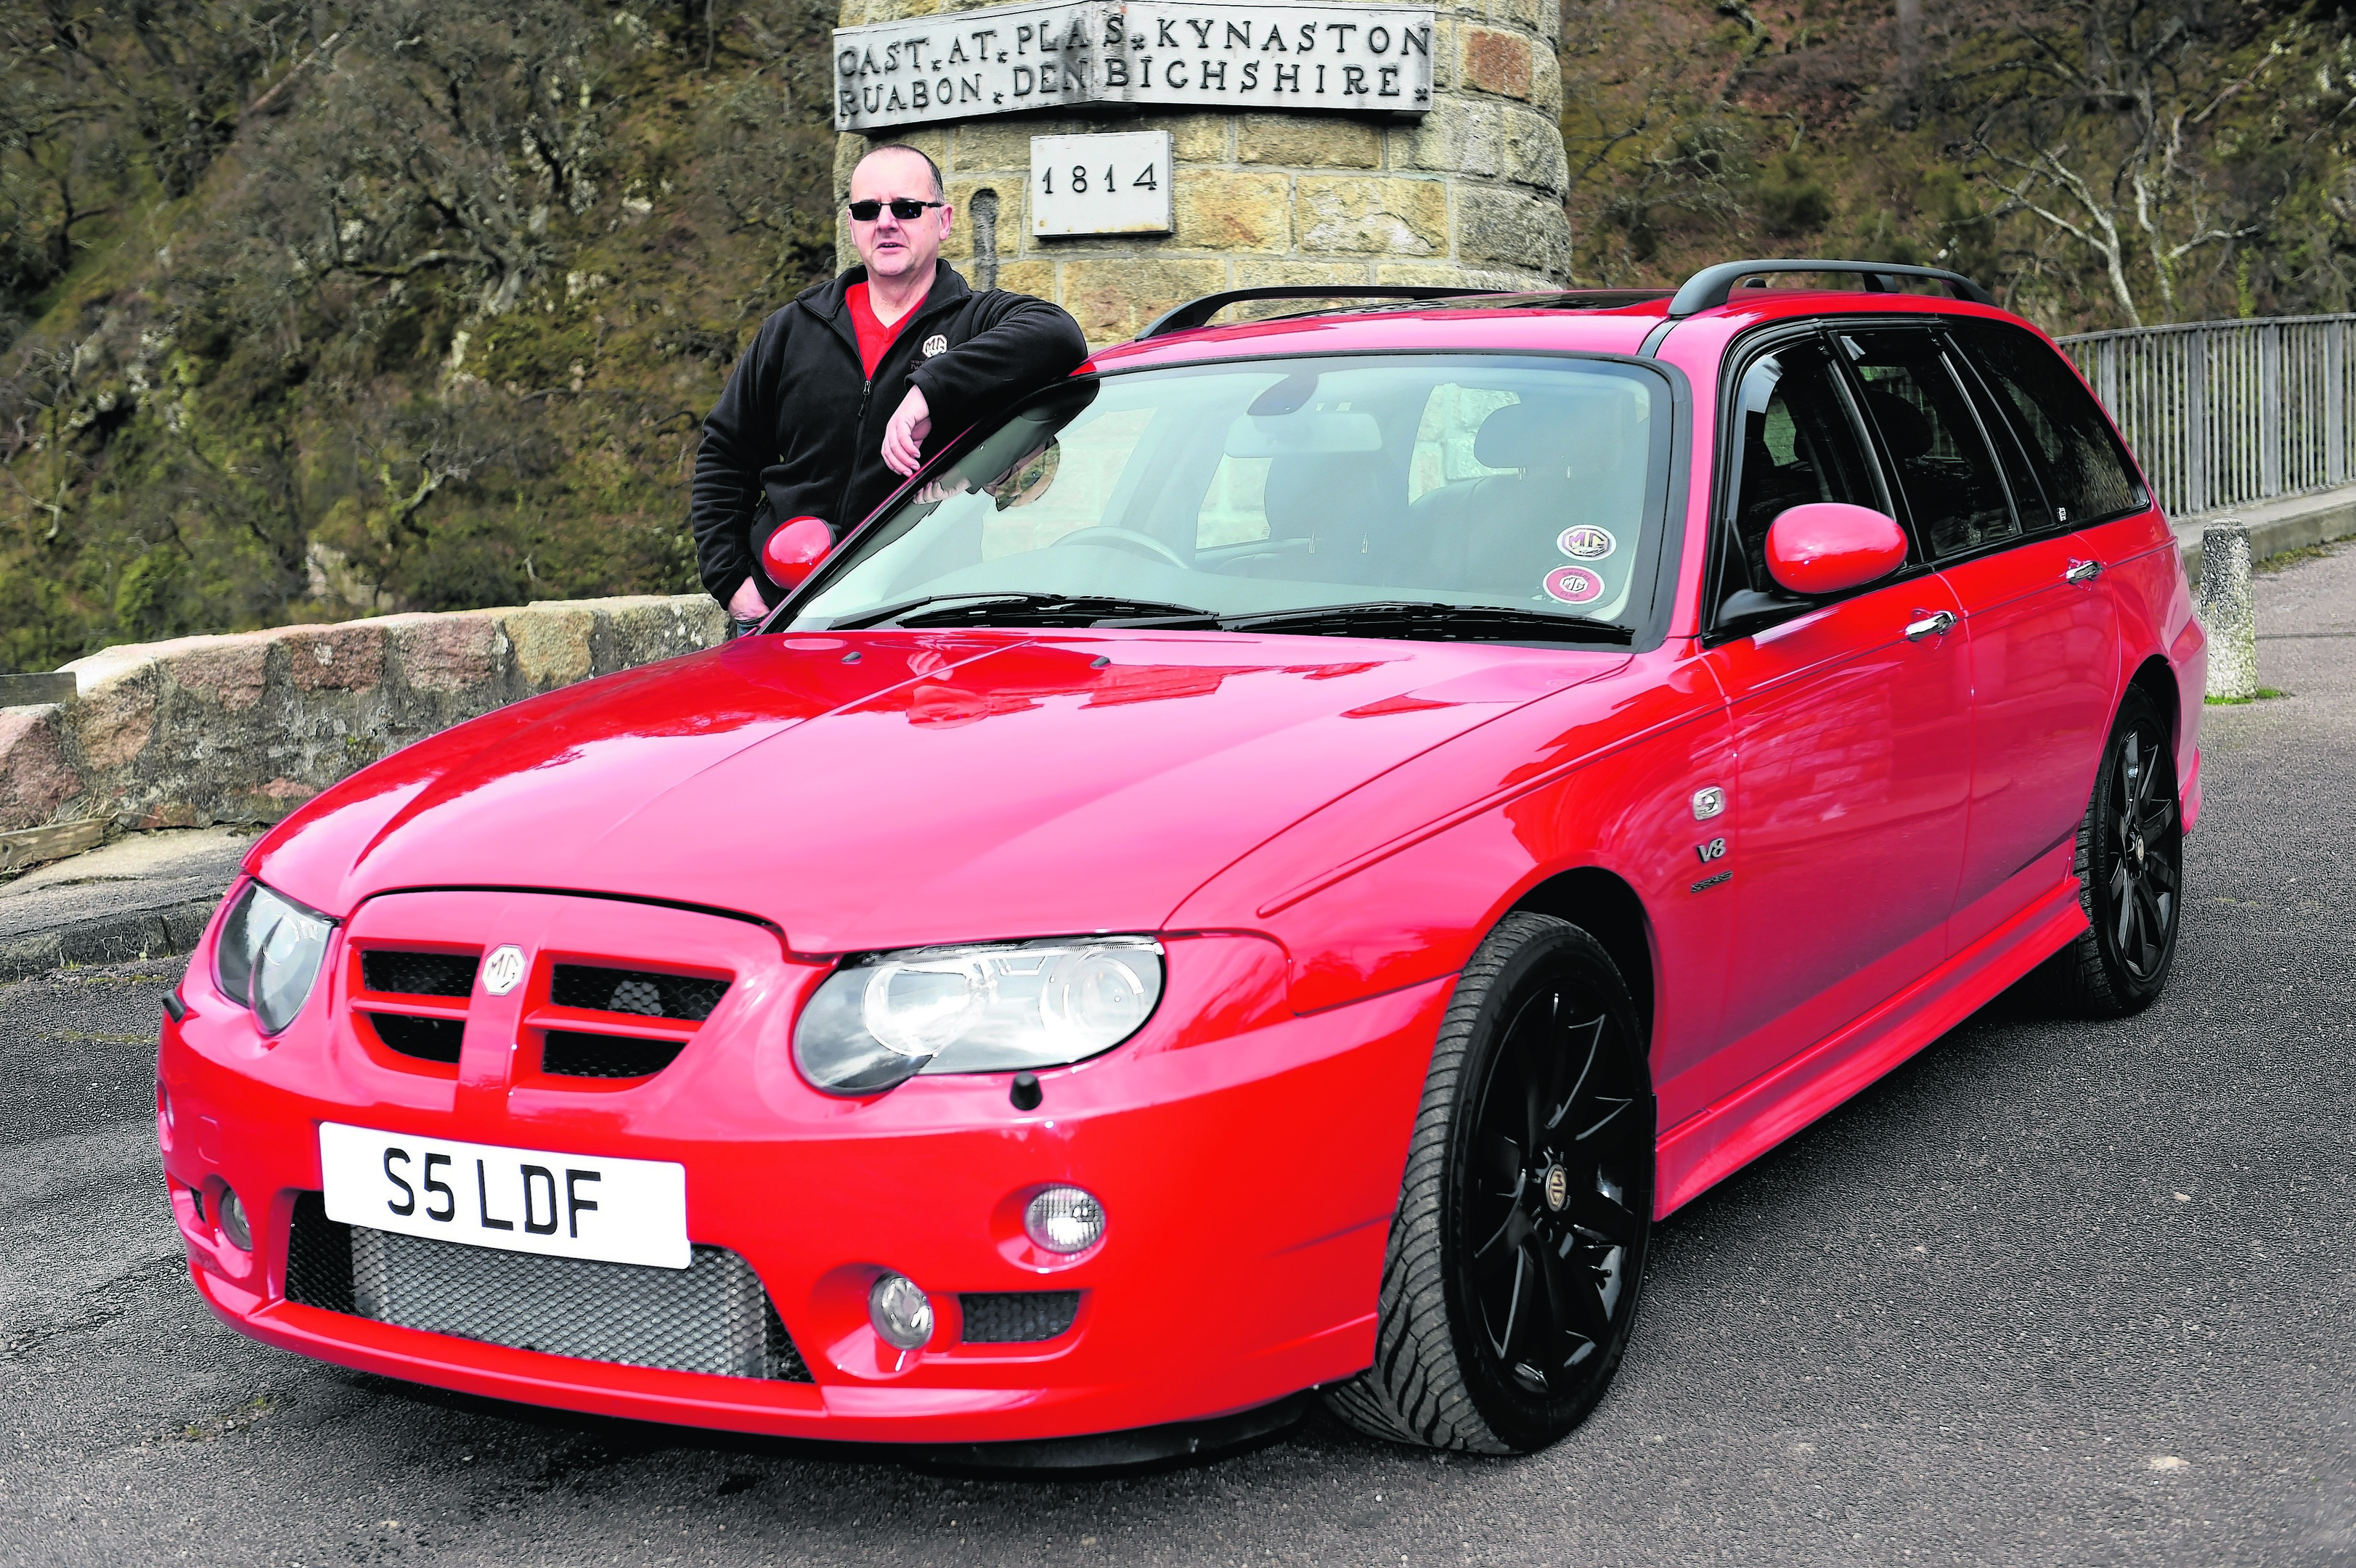 Les Finnie with his 2004 MG Zt-T V8